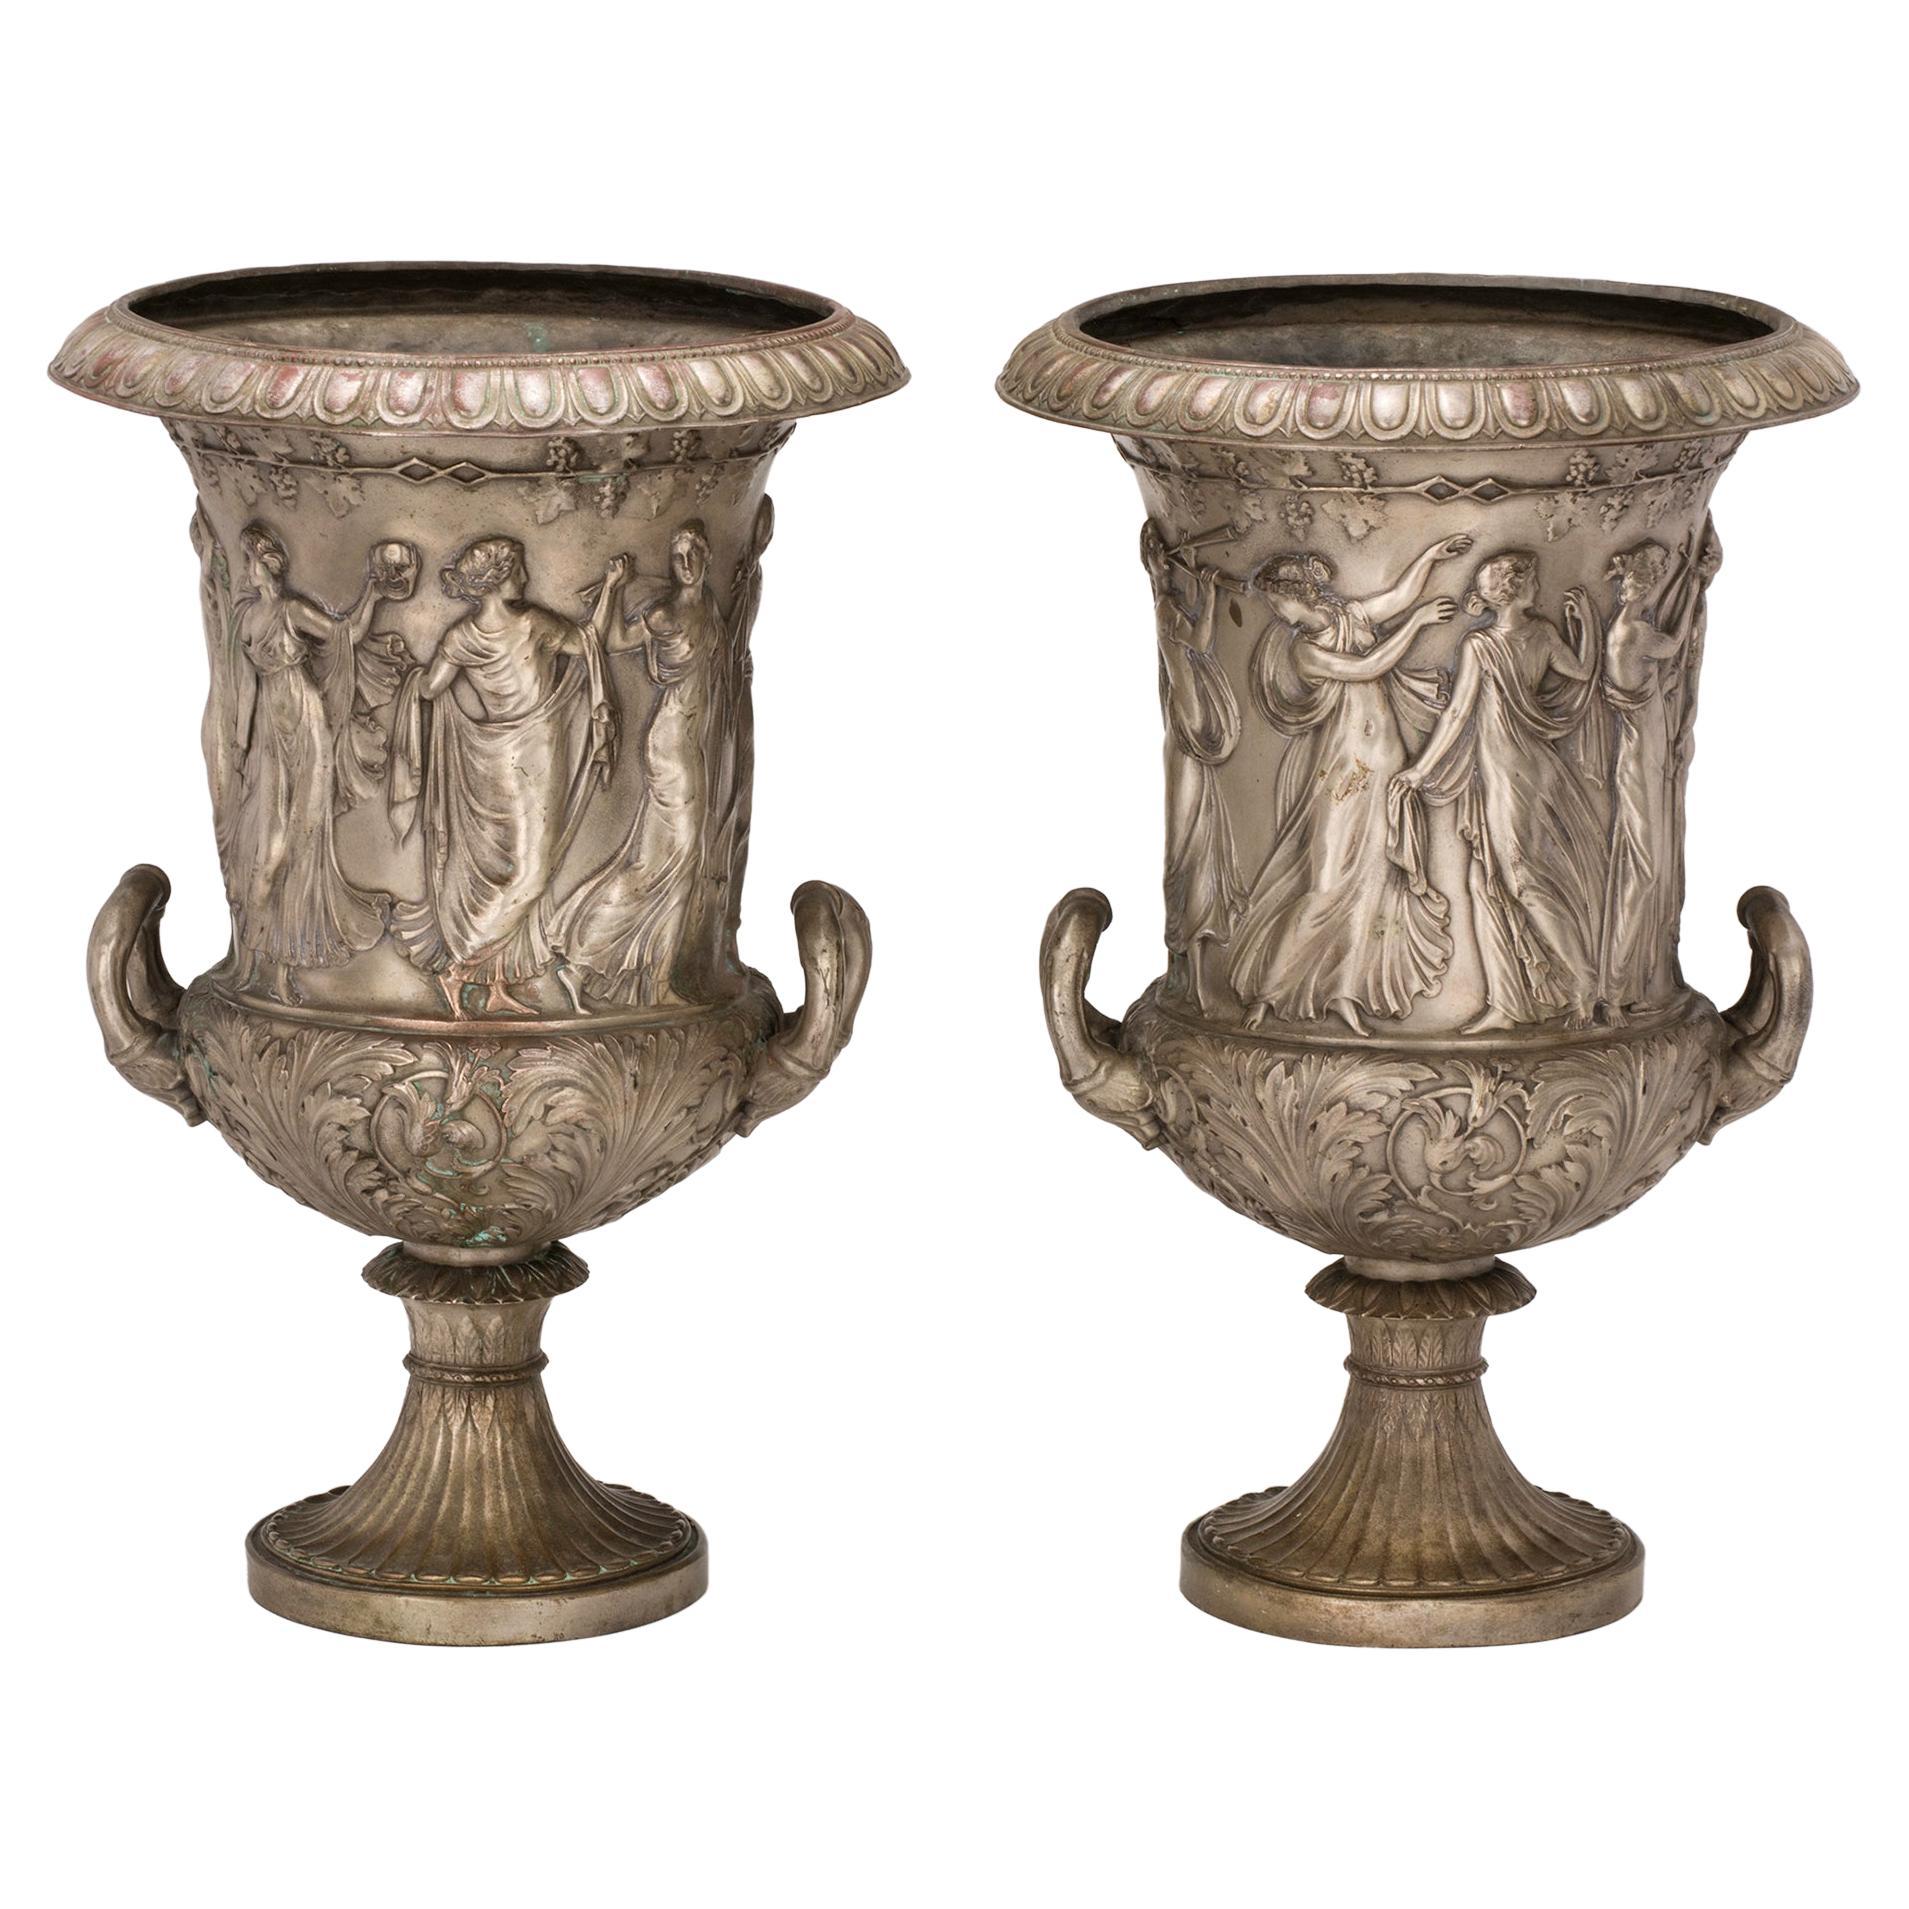 Large Planter Urns, 19th Century Bronze Medici Style, Pair For Sale